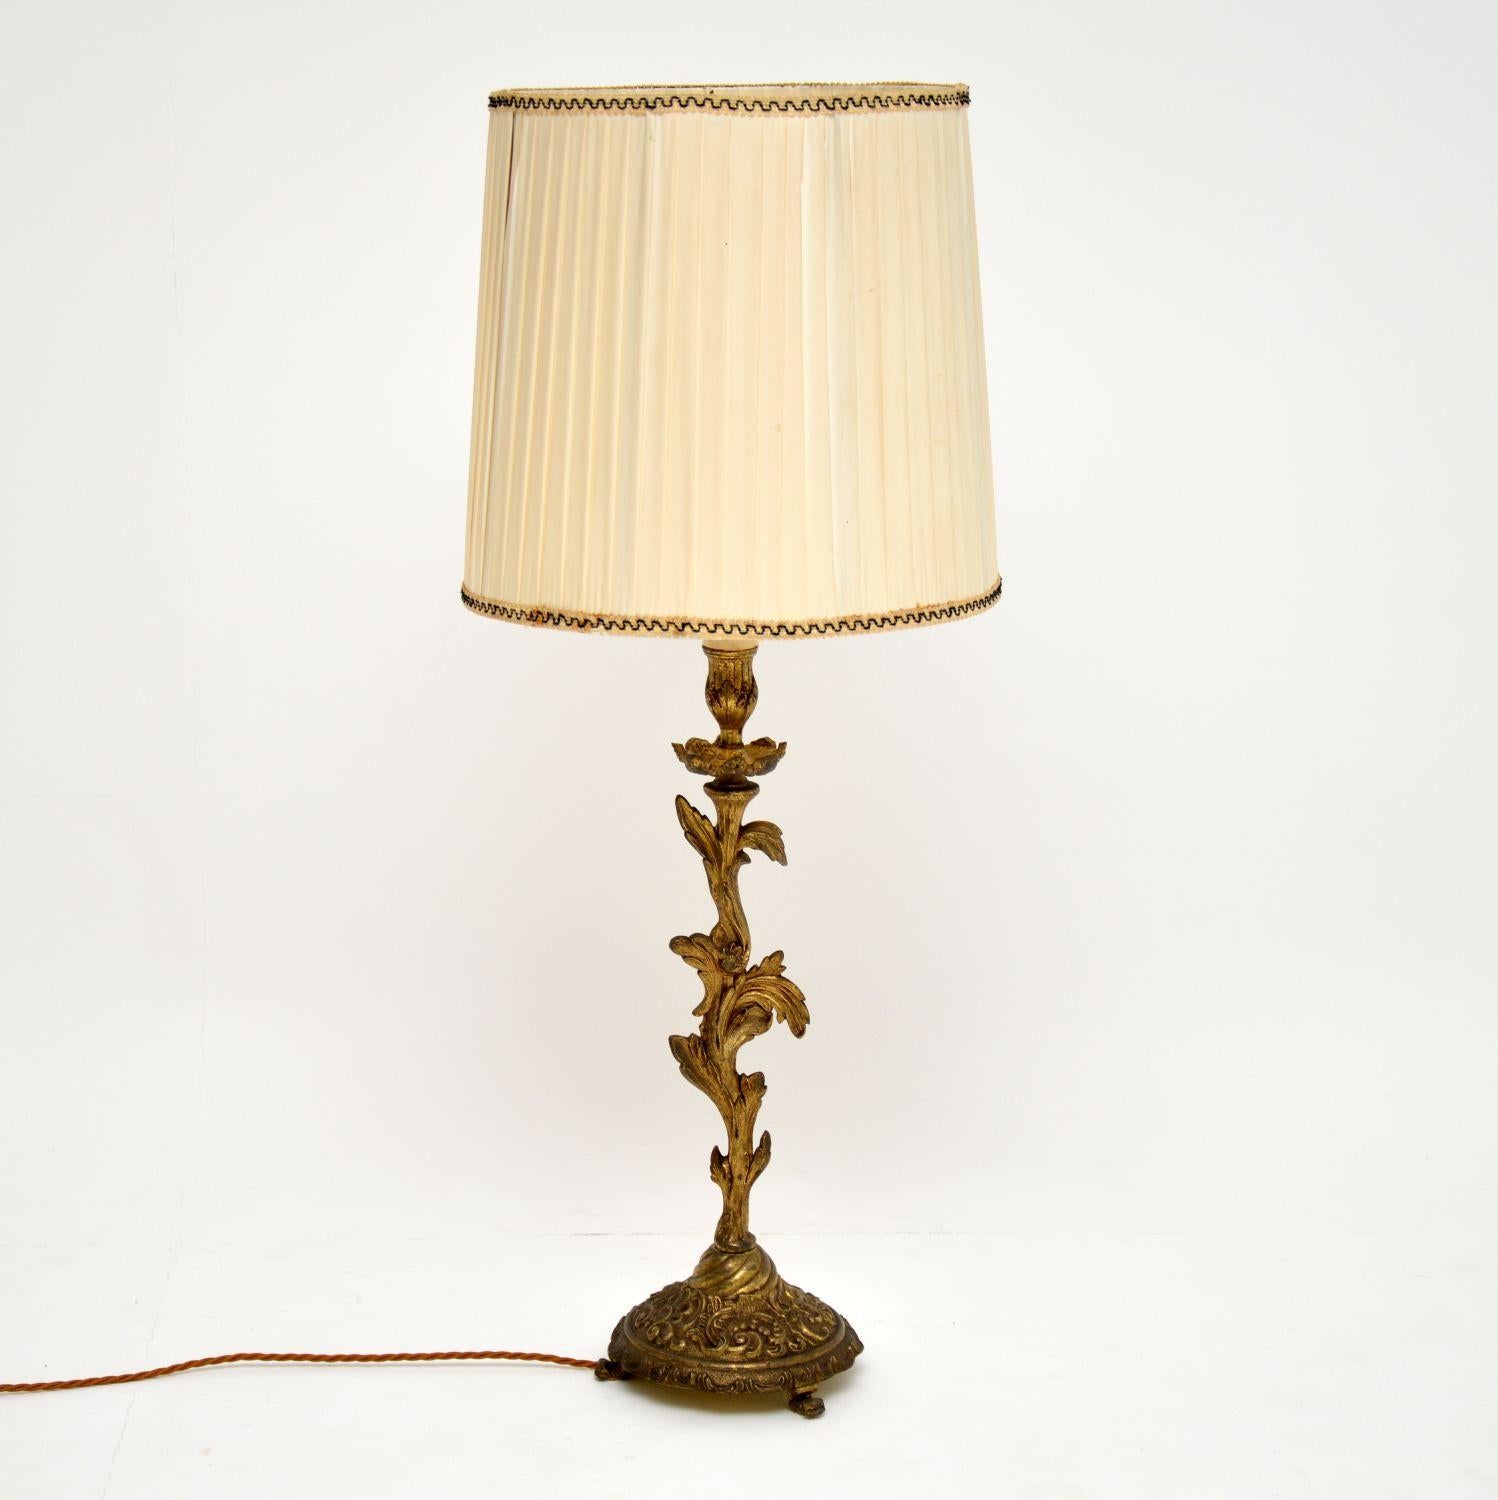 Antique gilt metal table lamp in good original condition, dating from circa 1930s period. We have just had it re-wired, so it’s in good working order. I believe this lamp is French & it’s well cast with some nice details. We have added the old